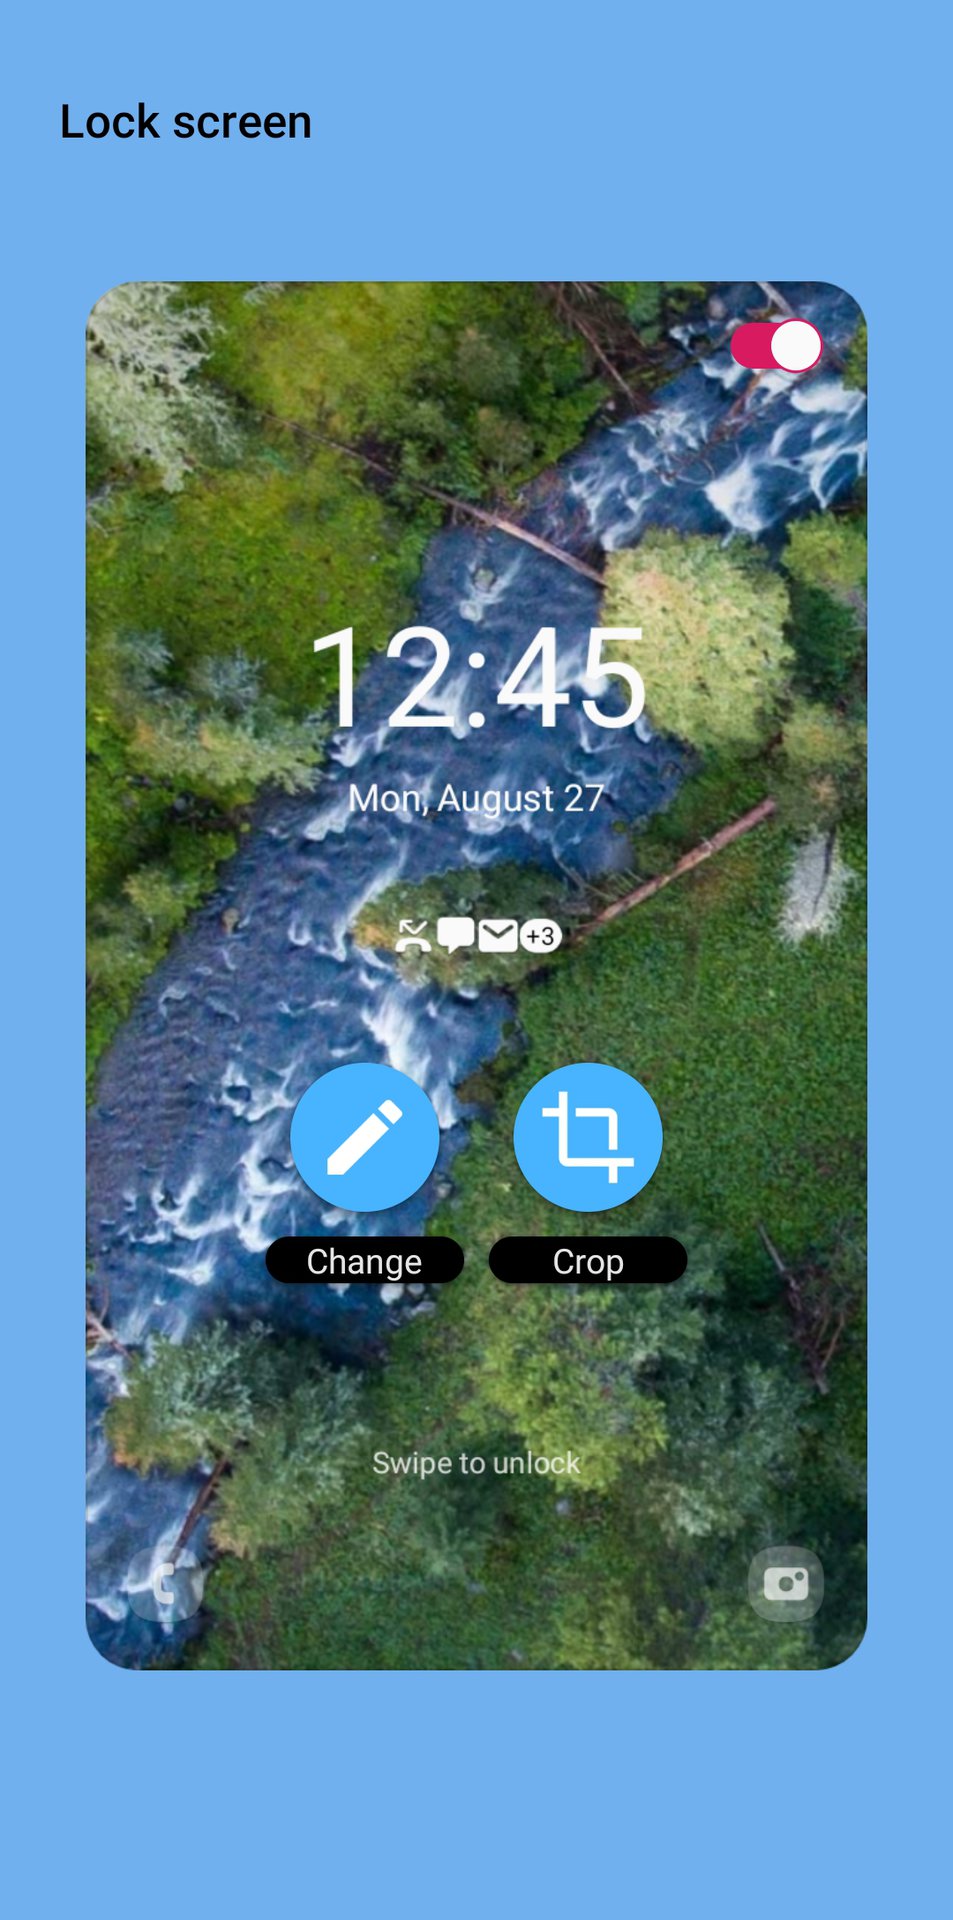 Setting the lock screen image in the Samsung Theme Park app.